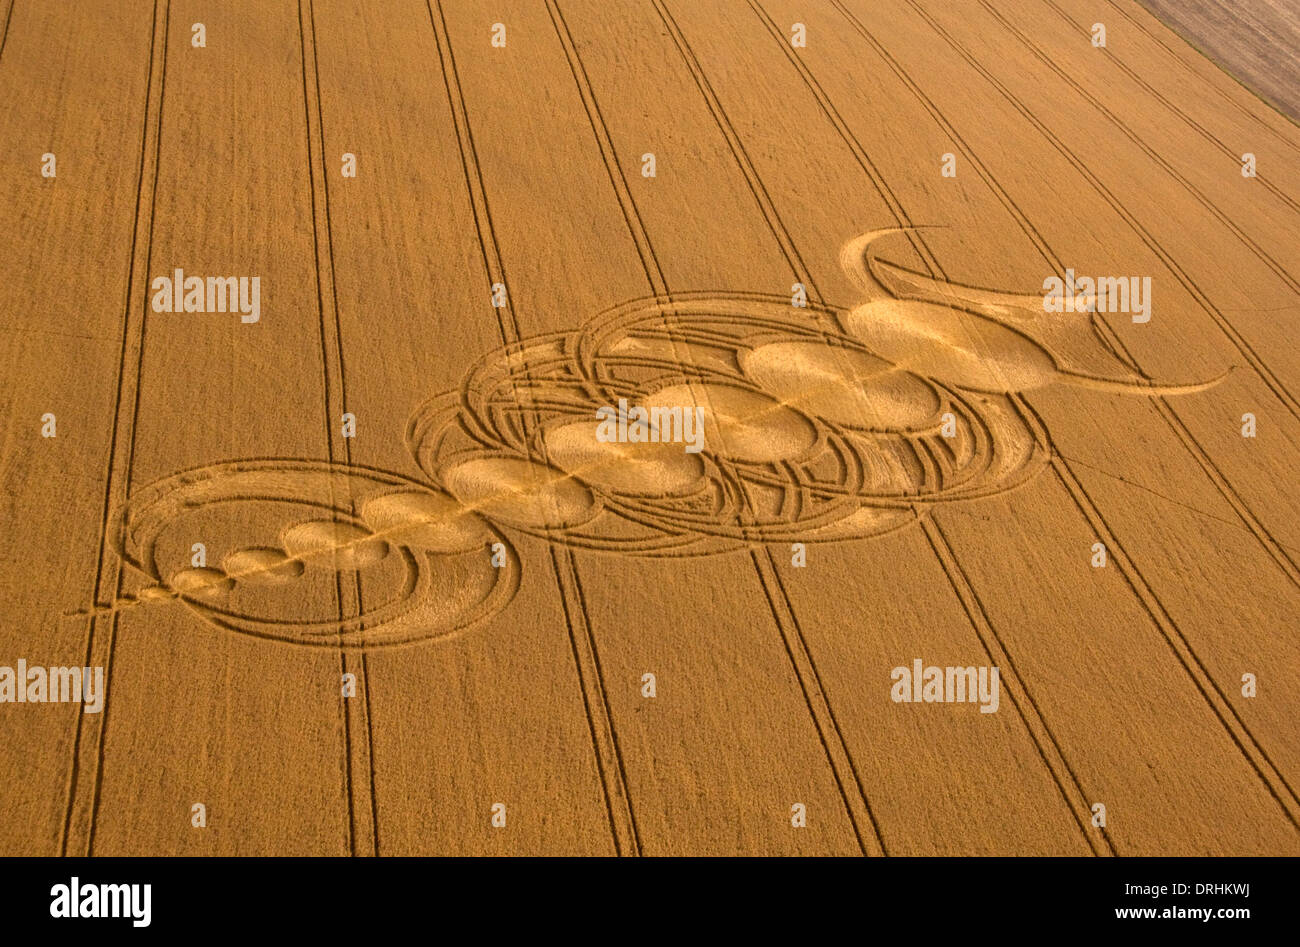 Crop circles in wheat fields near Alton Barnes,Wiltshire.These creations flatten the crops to make interesting patterns. Stock Photo